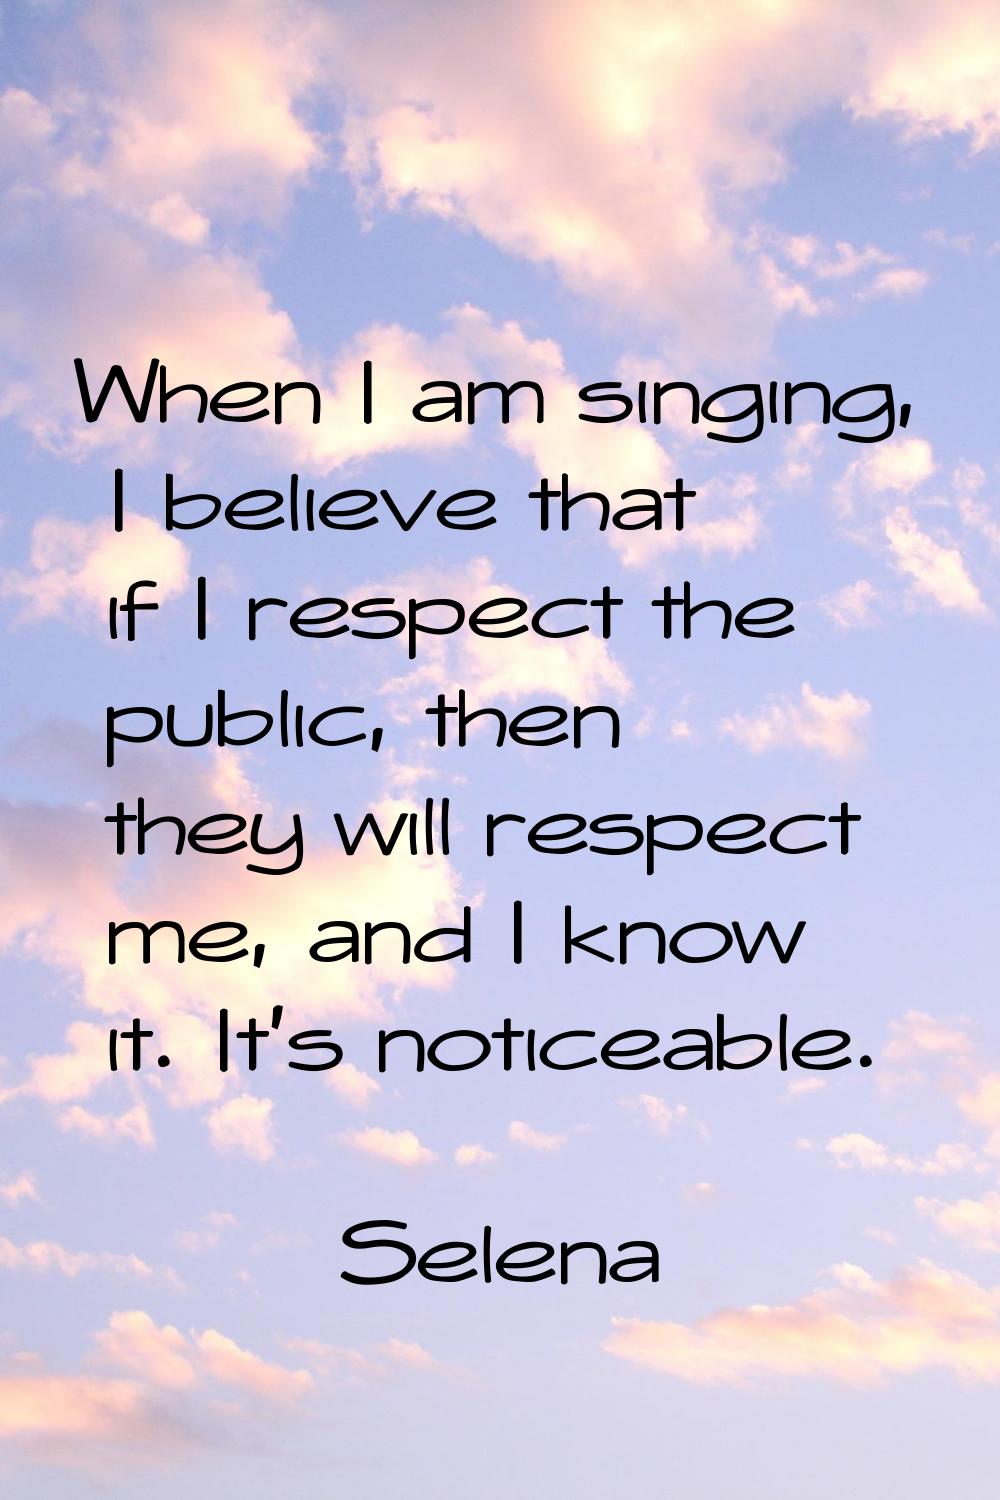 When I am singing, I believe that if I respect the public, then they will respect me, and I know it